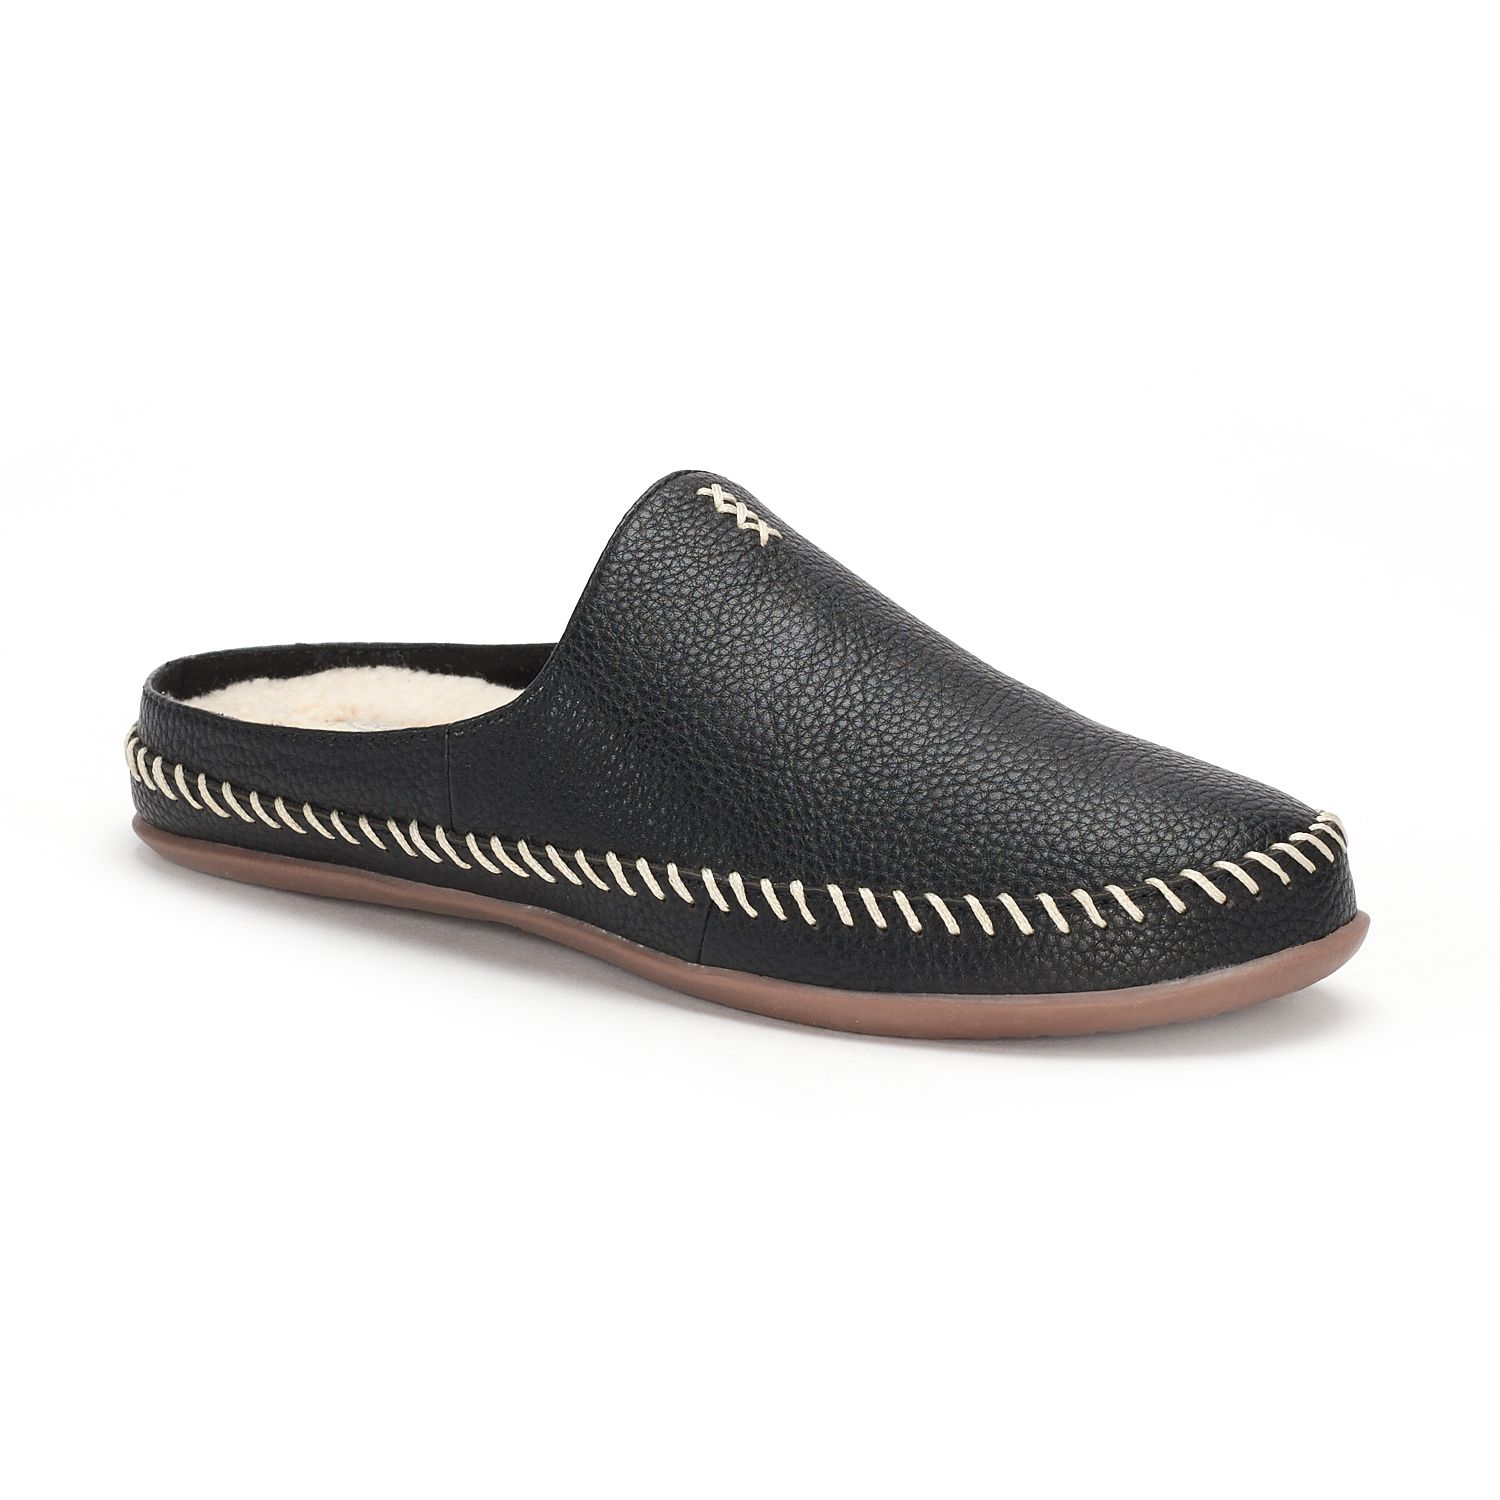 skechers leather slippers